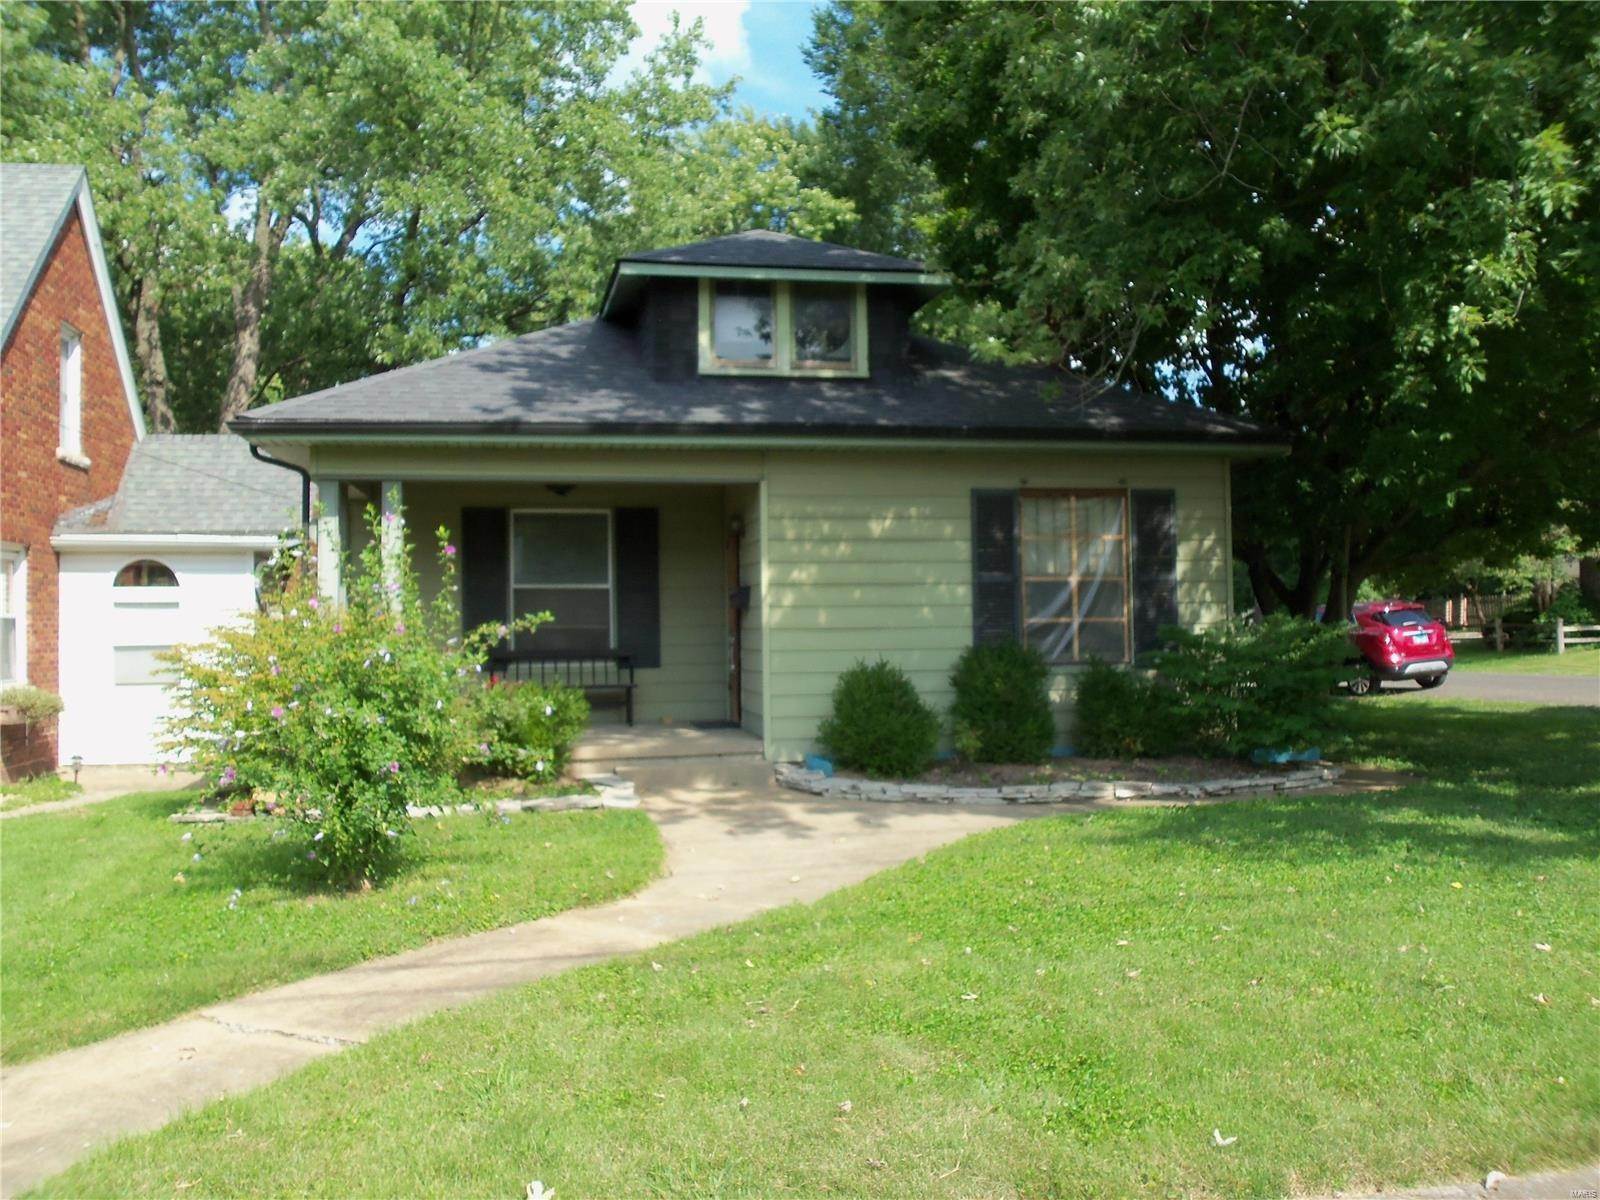 Property for Sale at 314 S Combs Avenue Collinsville, Illinois 62234 United States